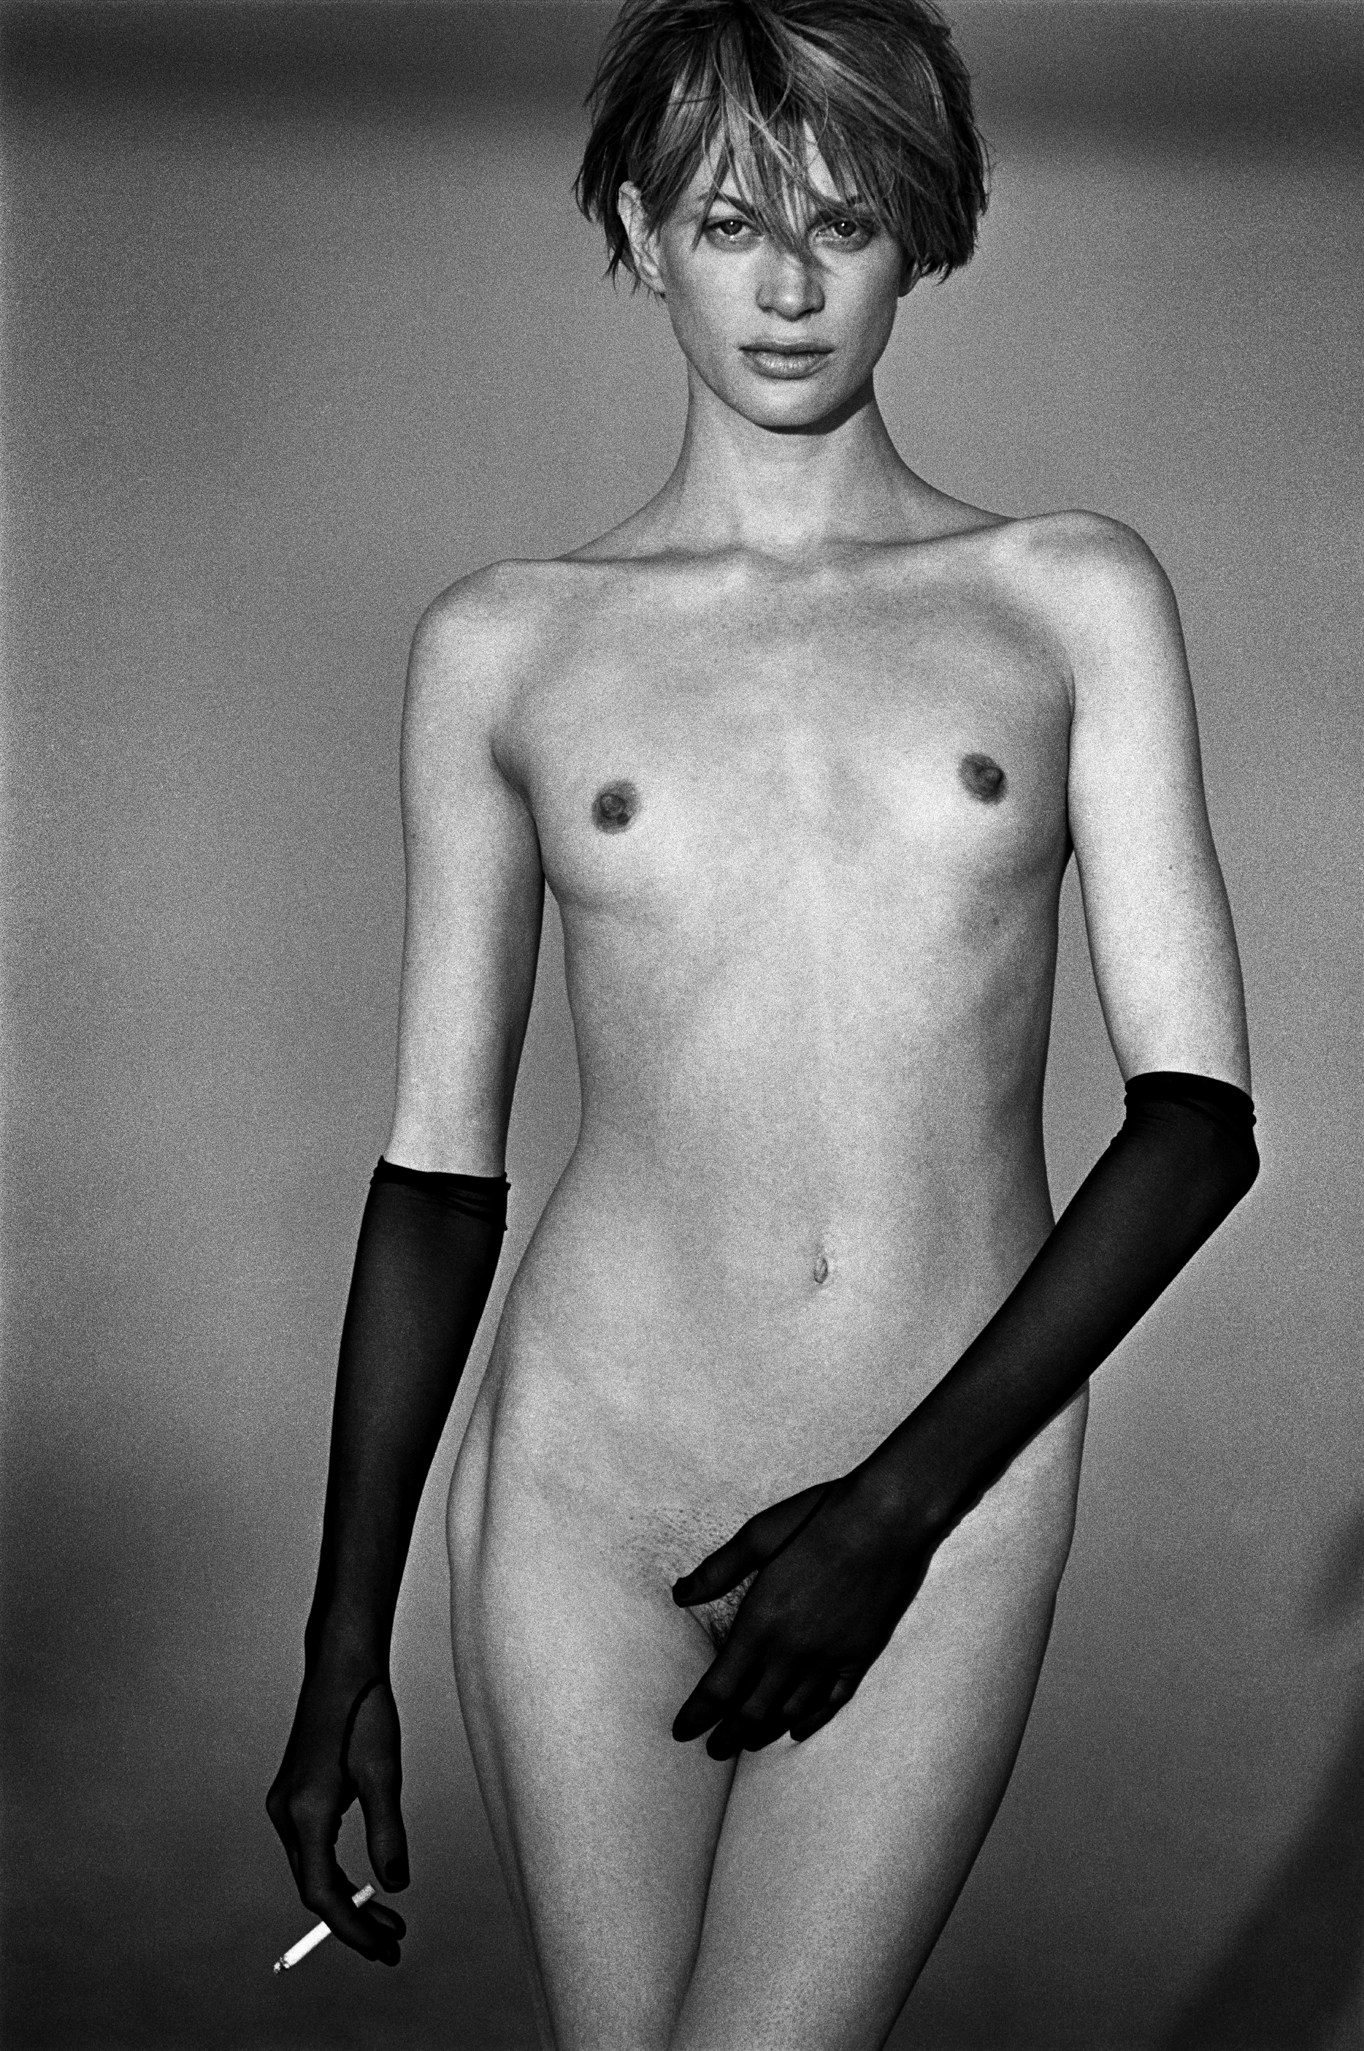 kristen mcmenamy naked wearing gloves and smoking a cigarette by peter lindbergh